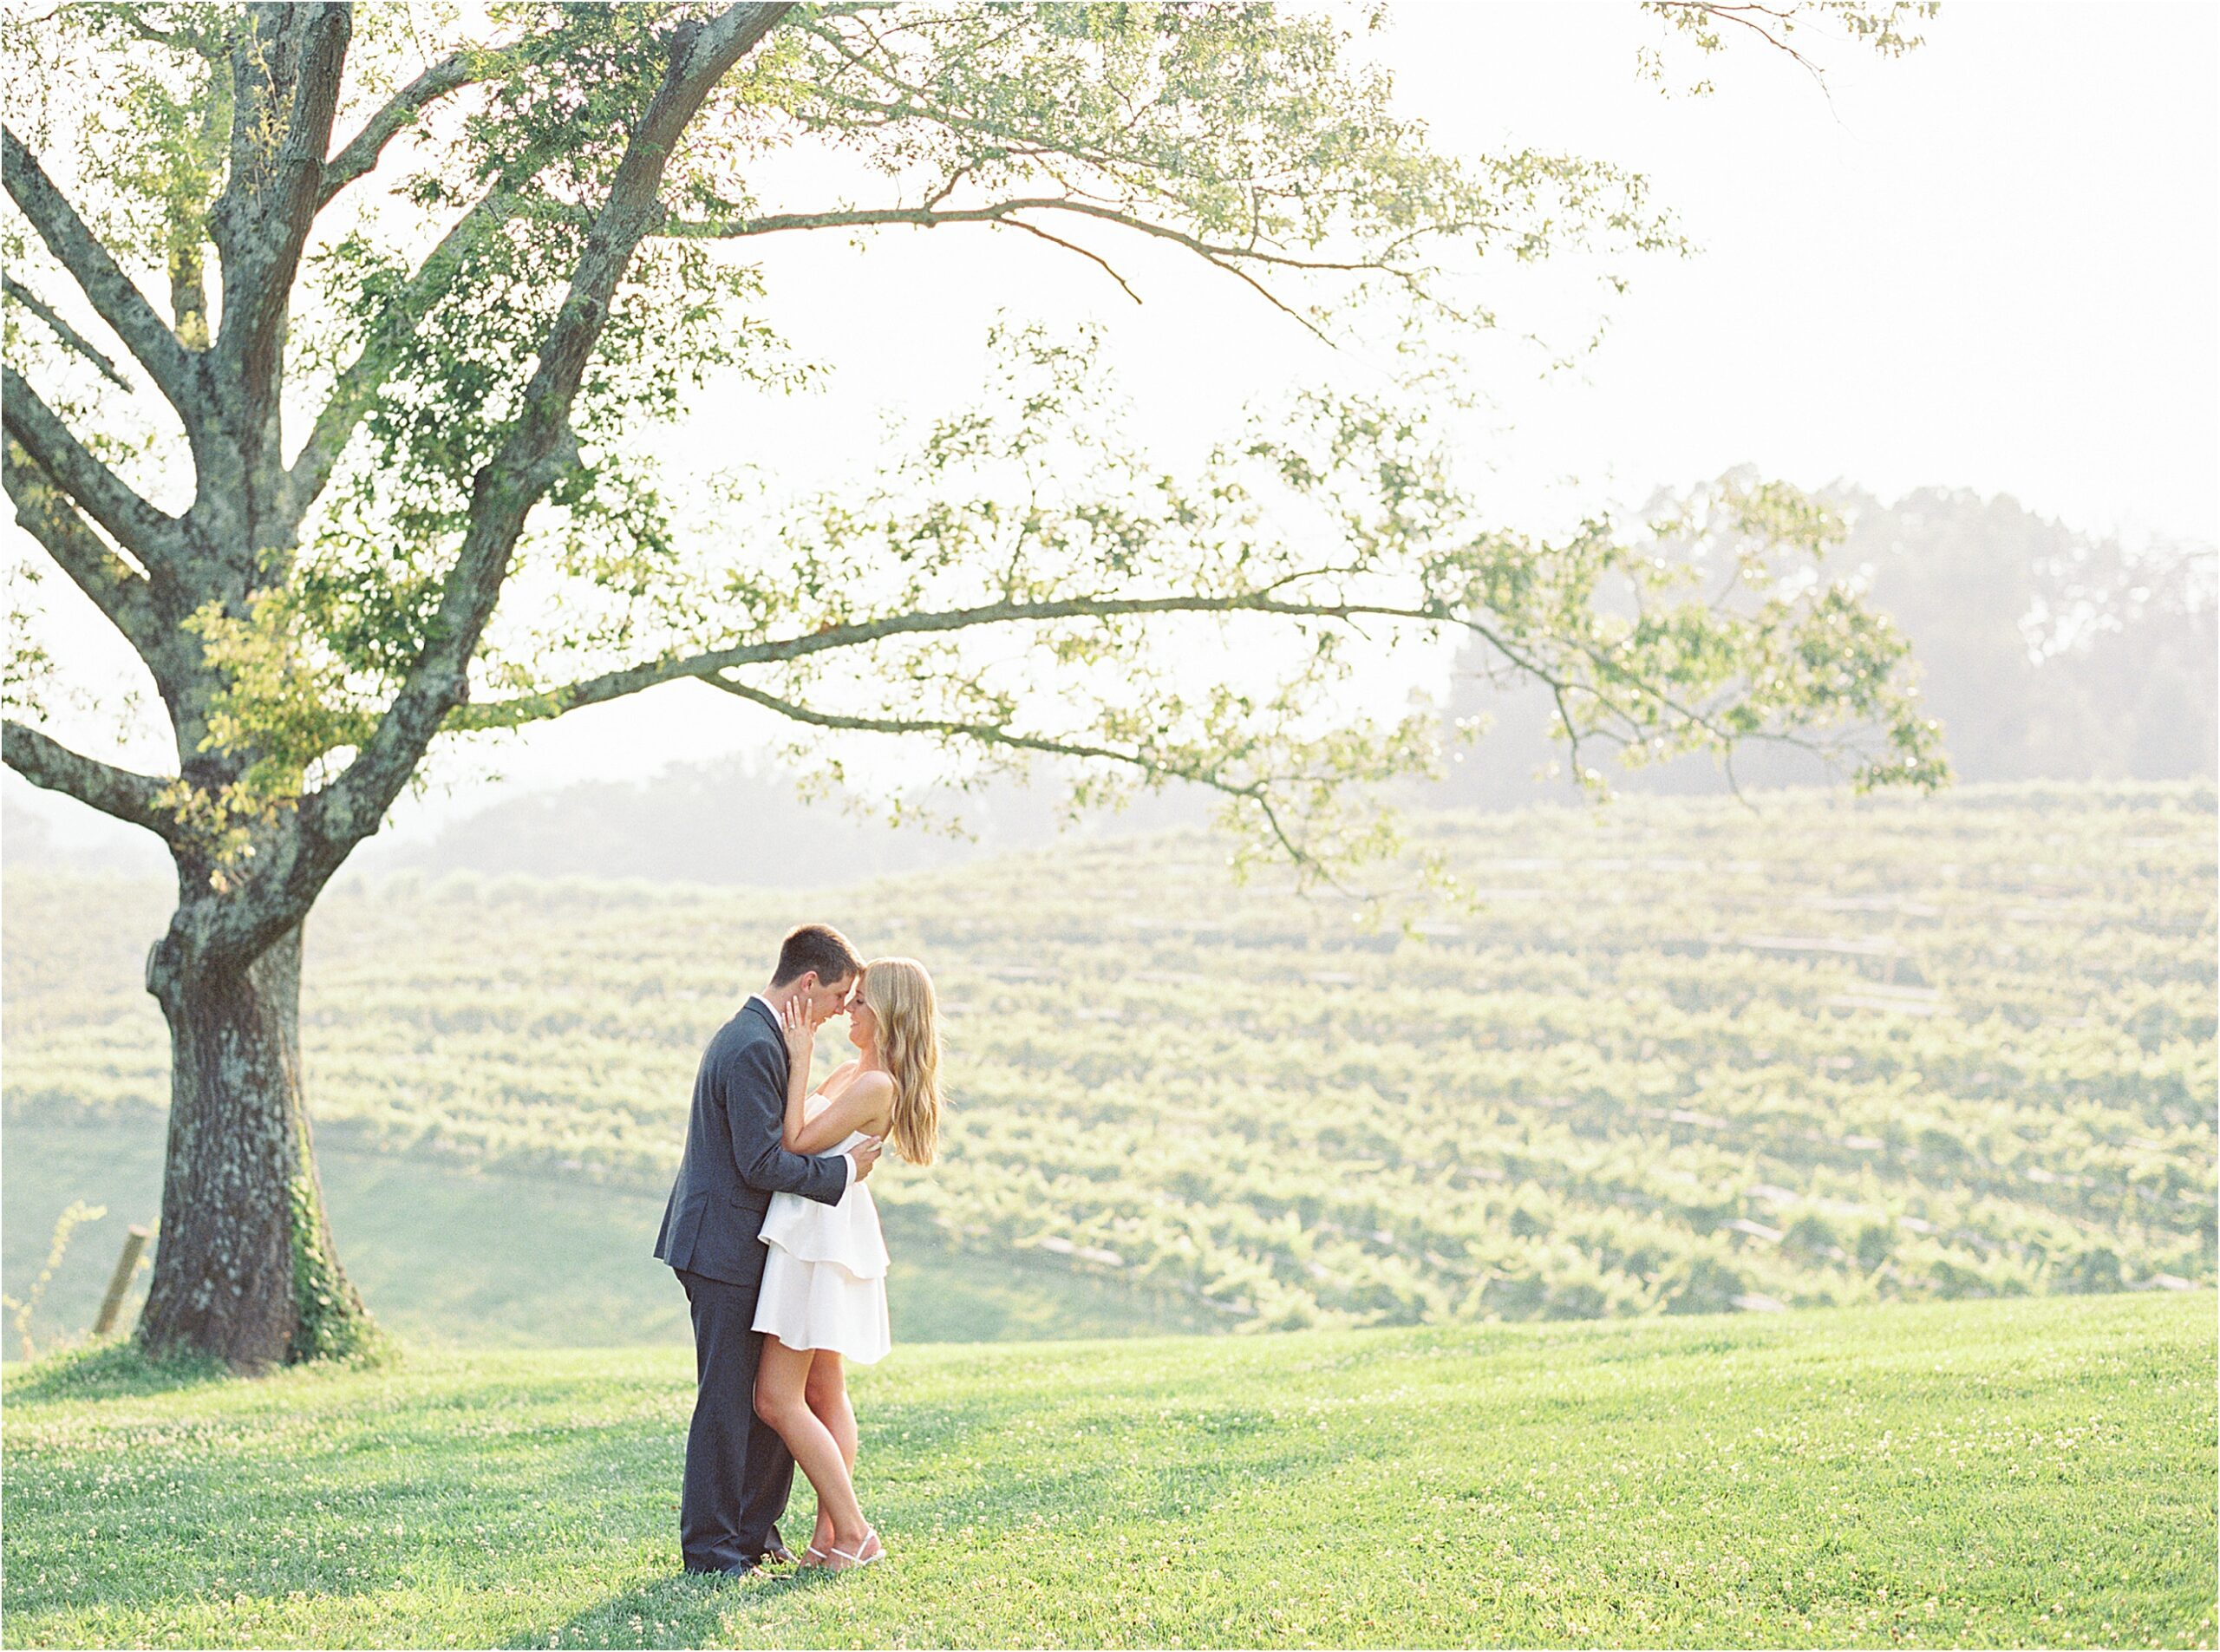 Couple embracing in an open field under a tree.